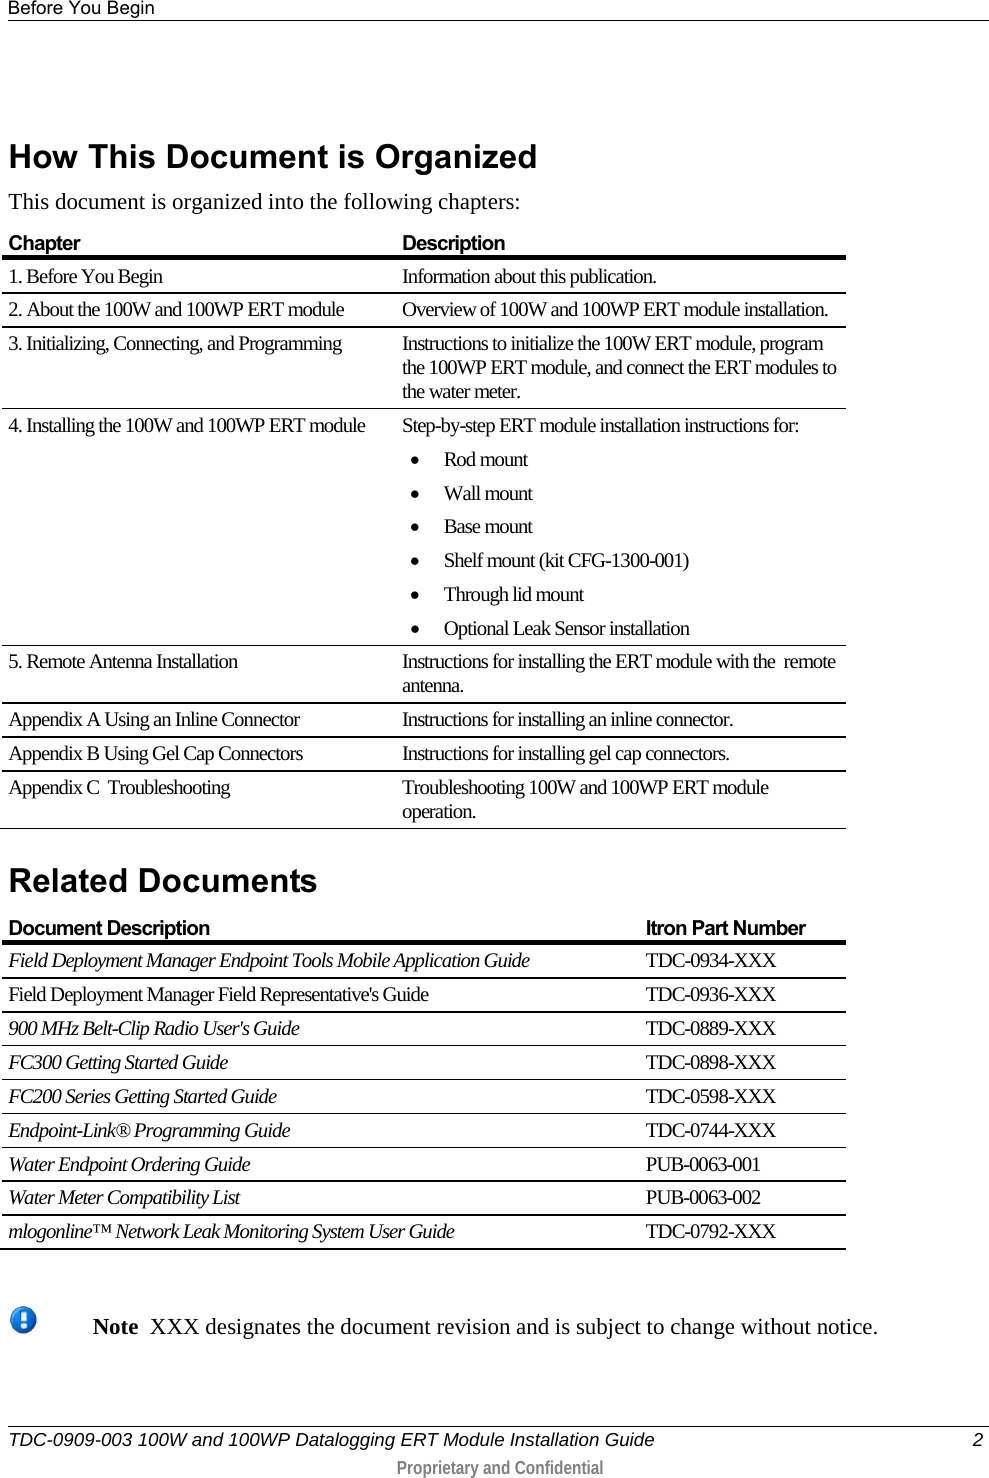 Before You Begin   TDC-0909-003 100W and 100WP Datalogging ERT Module Installation Guide  2  Proprietary and Confidential      How This Document is Organized This document is organized into the following chapters: Chapter Description 1. Before You Begin Information about this publication. 2. About the 100W and 100WP ERT module Overview of 100W and 100WP ERT module installation.  3. Initializing, Connecting, and Programming Instructions to initialize the 100W ERT module, program the 100WP ERT module, and connect the ERT modules to the water meter. 4. Installing the 100W and 100WP ERT module Step-by-step ERT module installation instructions for: • Rod mount • Wall mount • Base mount • Shelf mount (kit CFG-1300-001) • Through lid mount • Optional Leak Sensor installation 5. Remote Antenna Installation Instructions for installing the ERT module with the  remote antenna. Appendix A Using an Inline Connector Instructions for installing an inline connector. Appendix B Using Gel Cap Connectors Instructions for installing gel cap connectors. Appendix C  Troubleshooting Troubleshooting 100W and 100WP ERT module operation.  Related Documents Document Description Itron Part Number  Field Deployment Manager Endpoint Tools Mobile Application Guide TDC-0934-XXX Field Deployment Manager Field Representative&apos;s Guide  TDC-0936-XXX 900 MHz Belt-Clip Radio User&apos;s Guide TDC-0889-XXX FC300 Getting Started Guide  TDC-0898-XXX FC200 Series Getting Started Guide TDC-0598-XXX Endpoint-Link® Programming Guide TDC-0744-XXX Water Endpoint Ordering Guide PUB-0063-001 Water Meter Compatibility List PUB-0063-002 mlogonline™ Network Leak Monitoring System User Guide TDC-0792-XXX   Note  XXX designates the document revision and is subject to change without notice.  